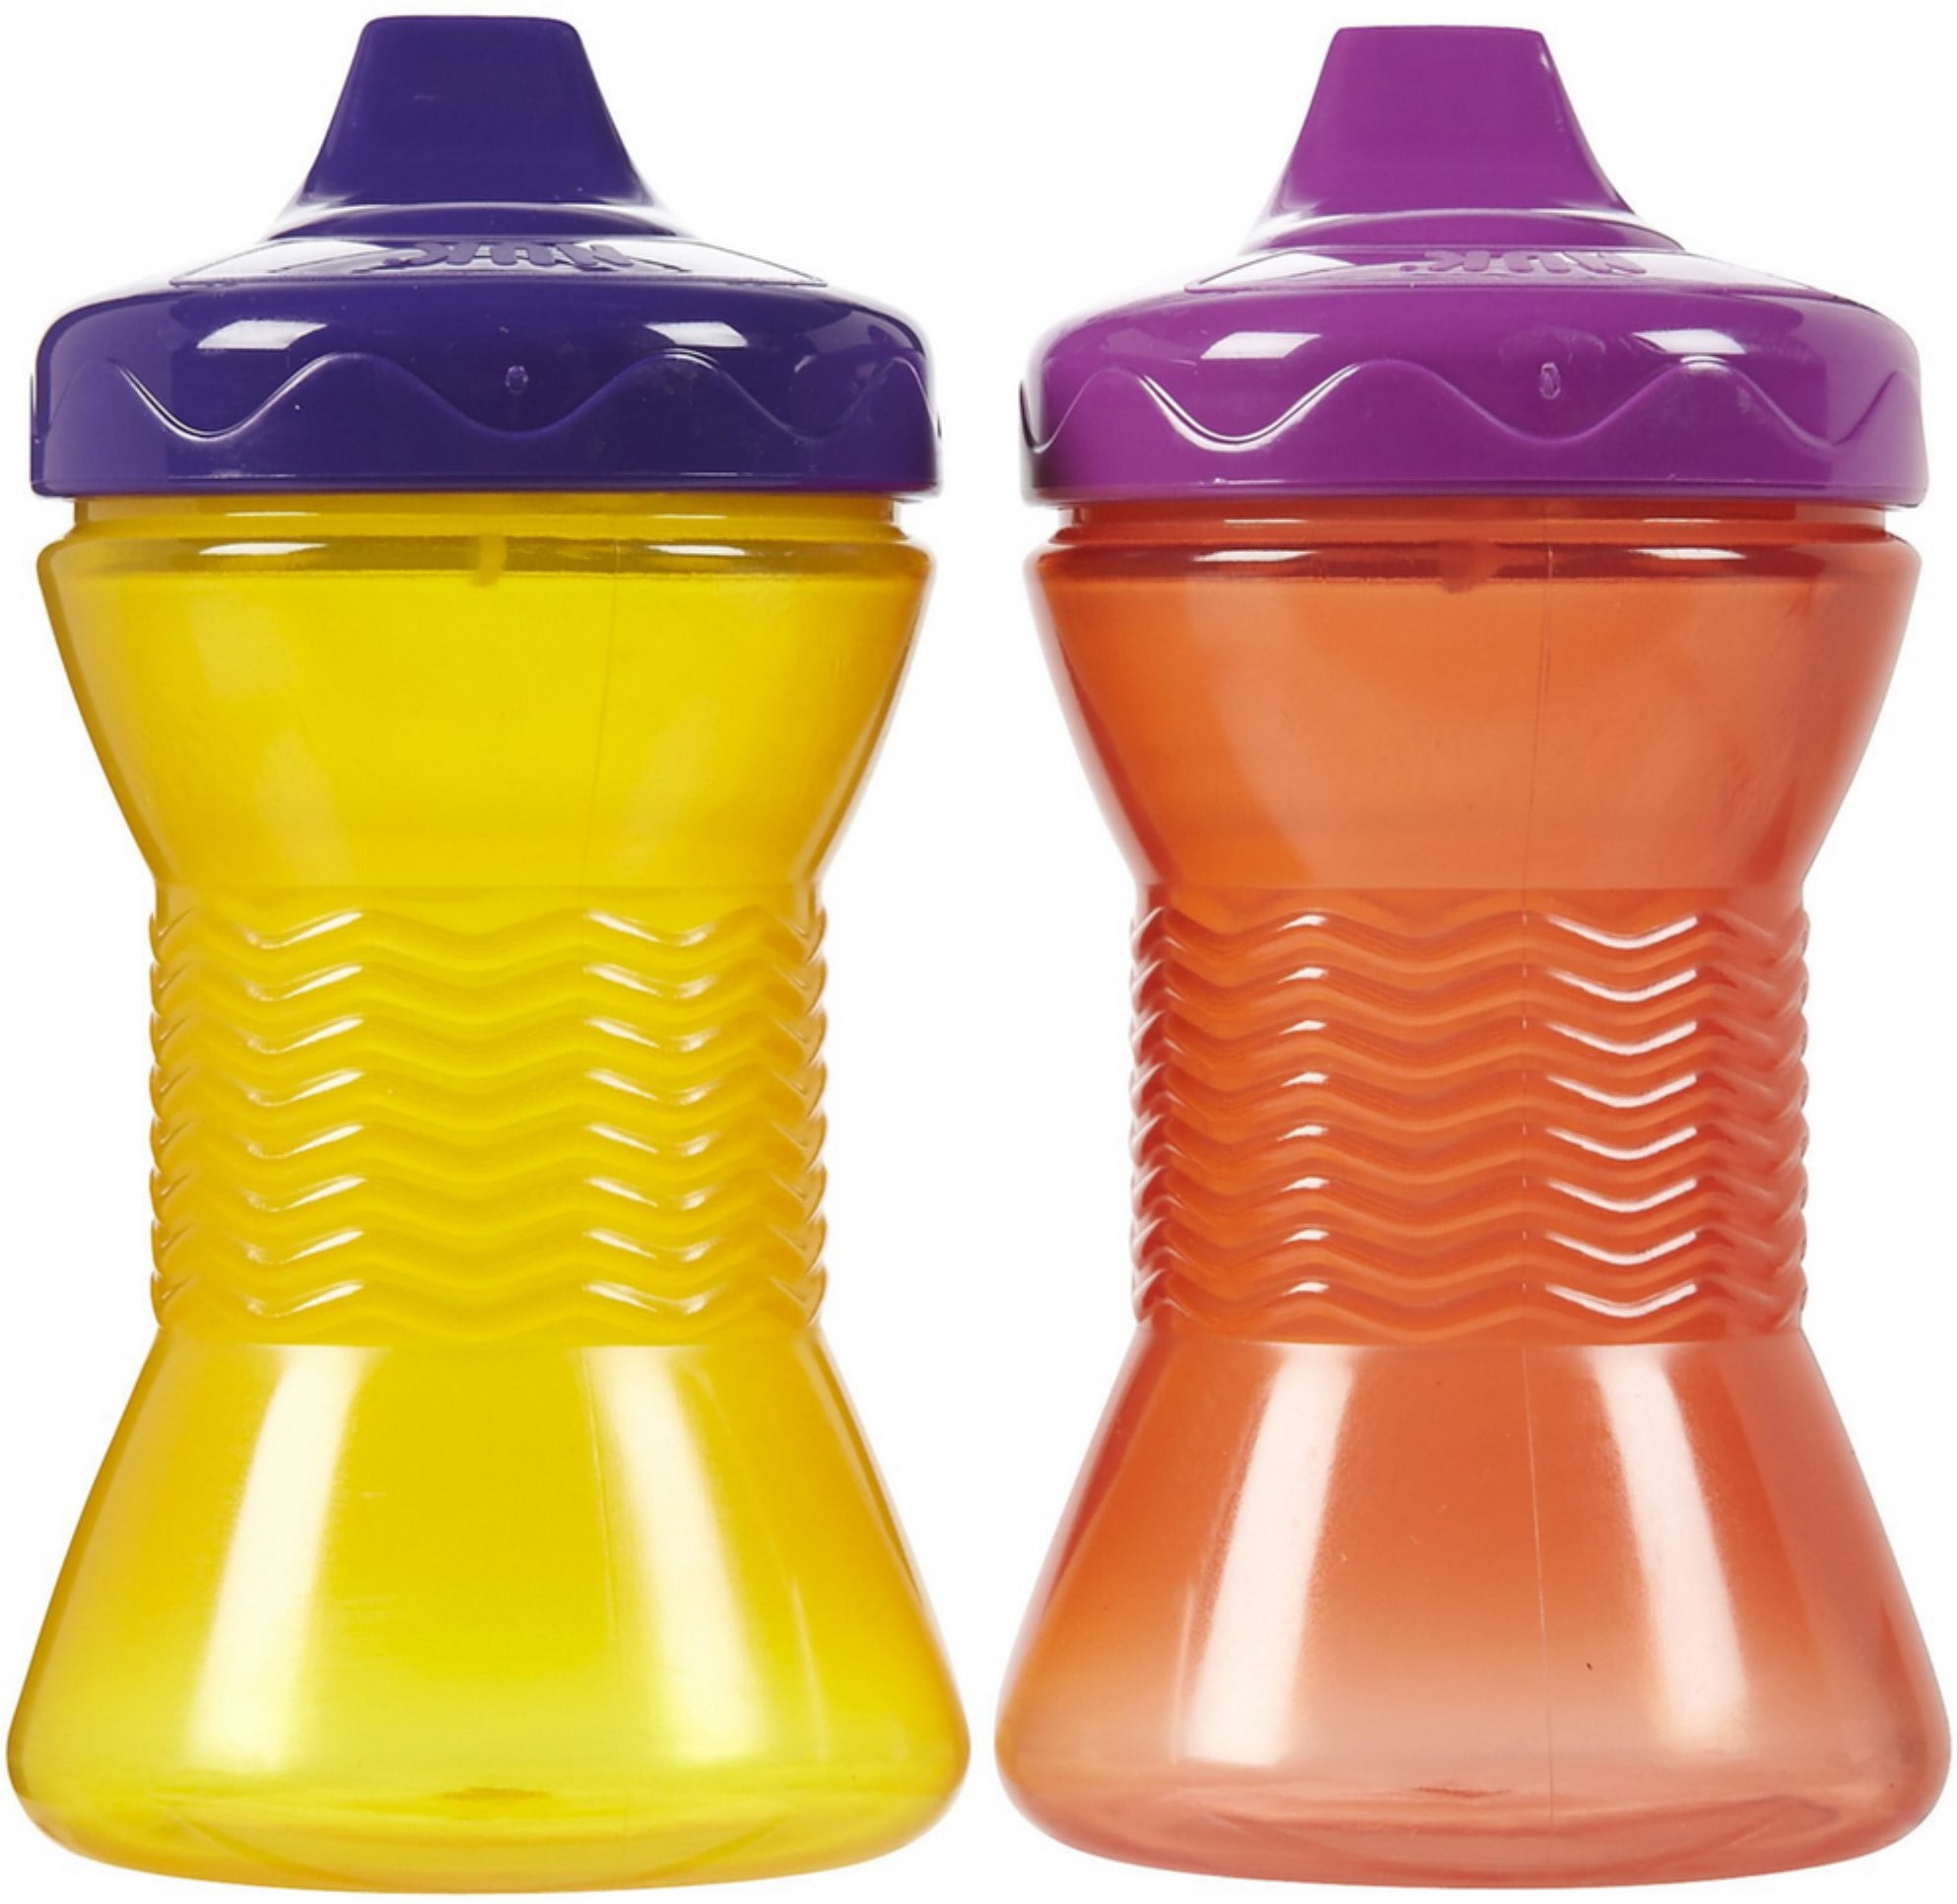 Gerber Graduates Fun Grips 12m Spill-Proof Cups Colors May Vary 2 ea 